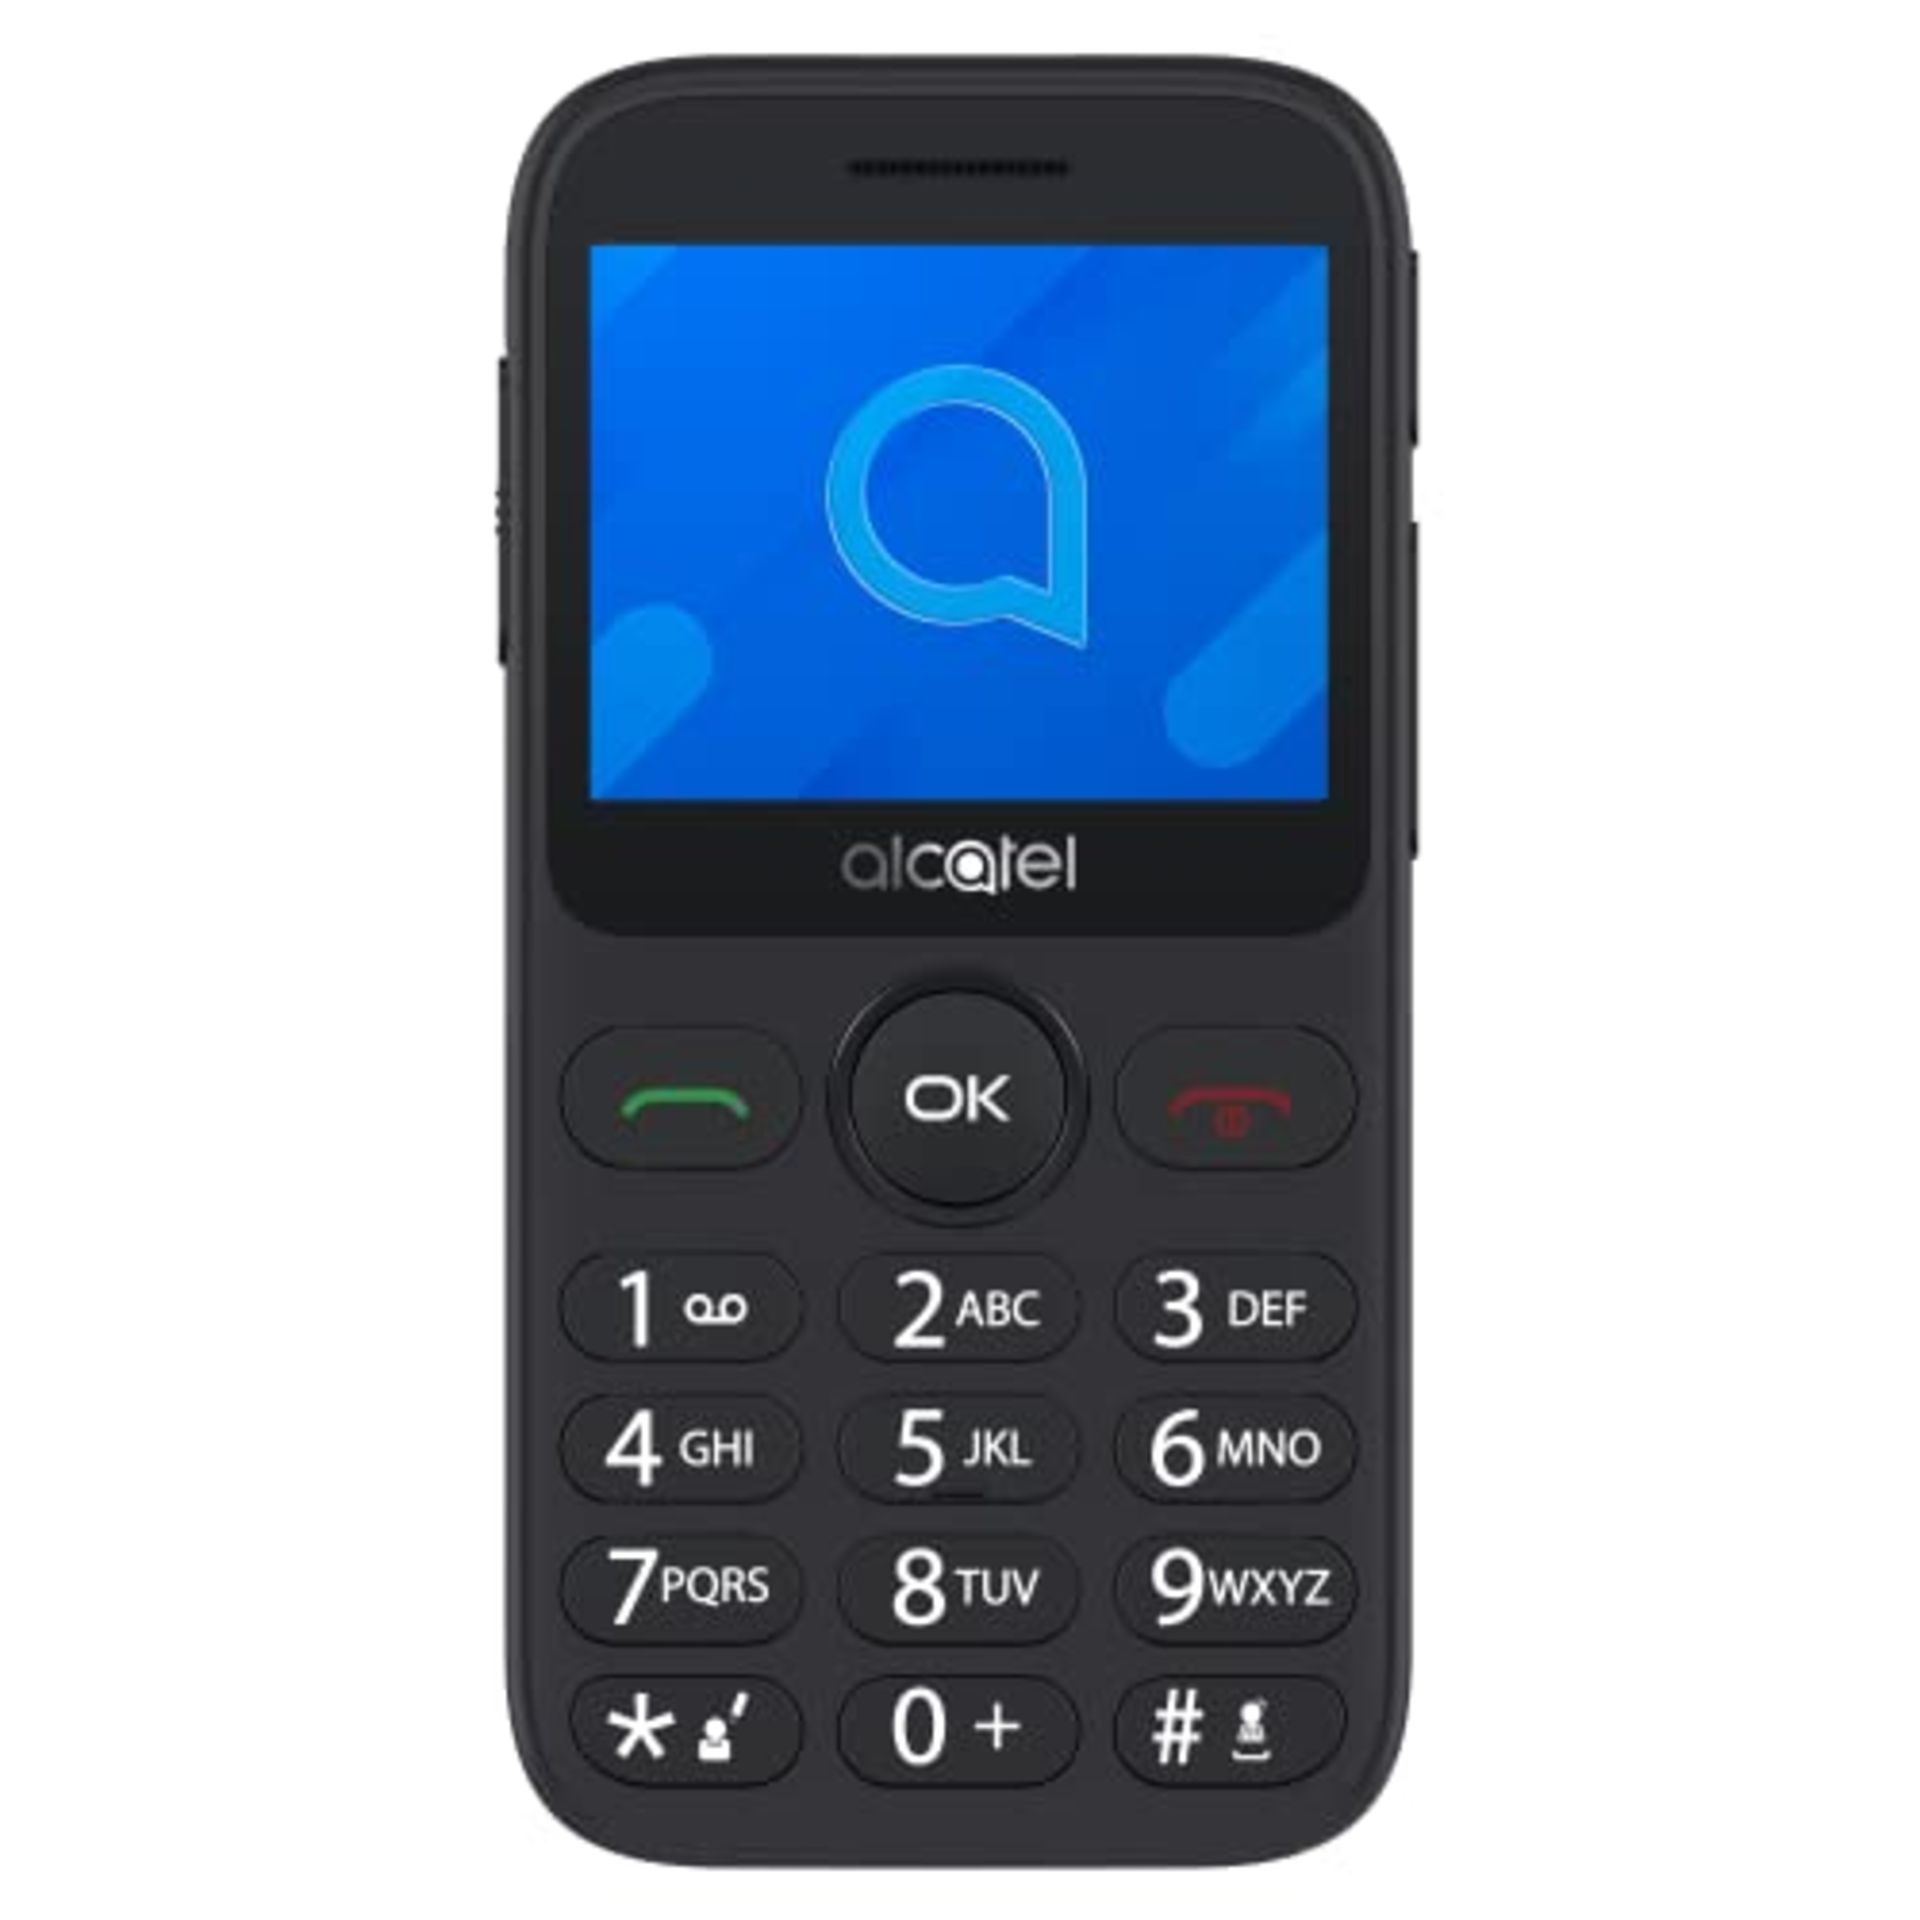 Alcatel 2020X - Mobile Phone, 2.4" Color Display, Large Buttons, SOS Button, Charging